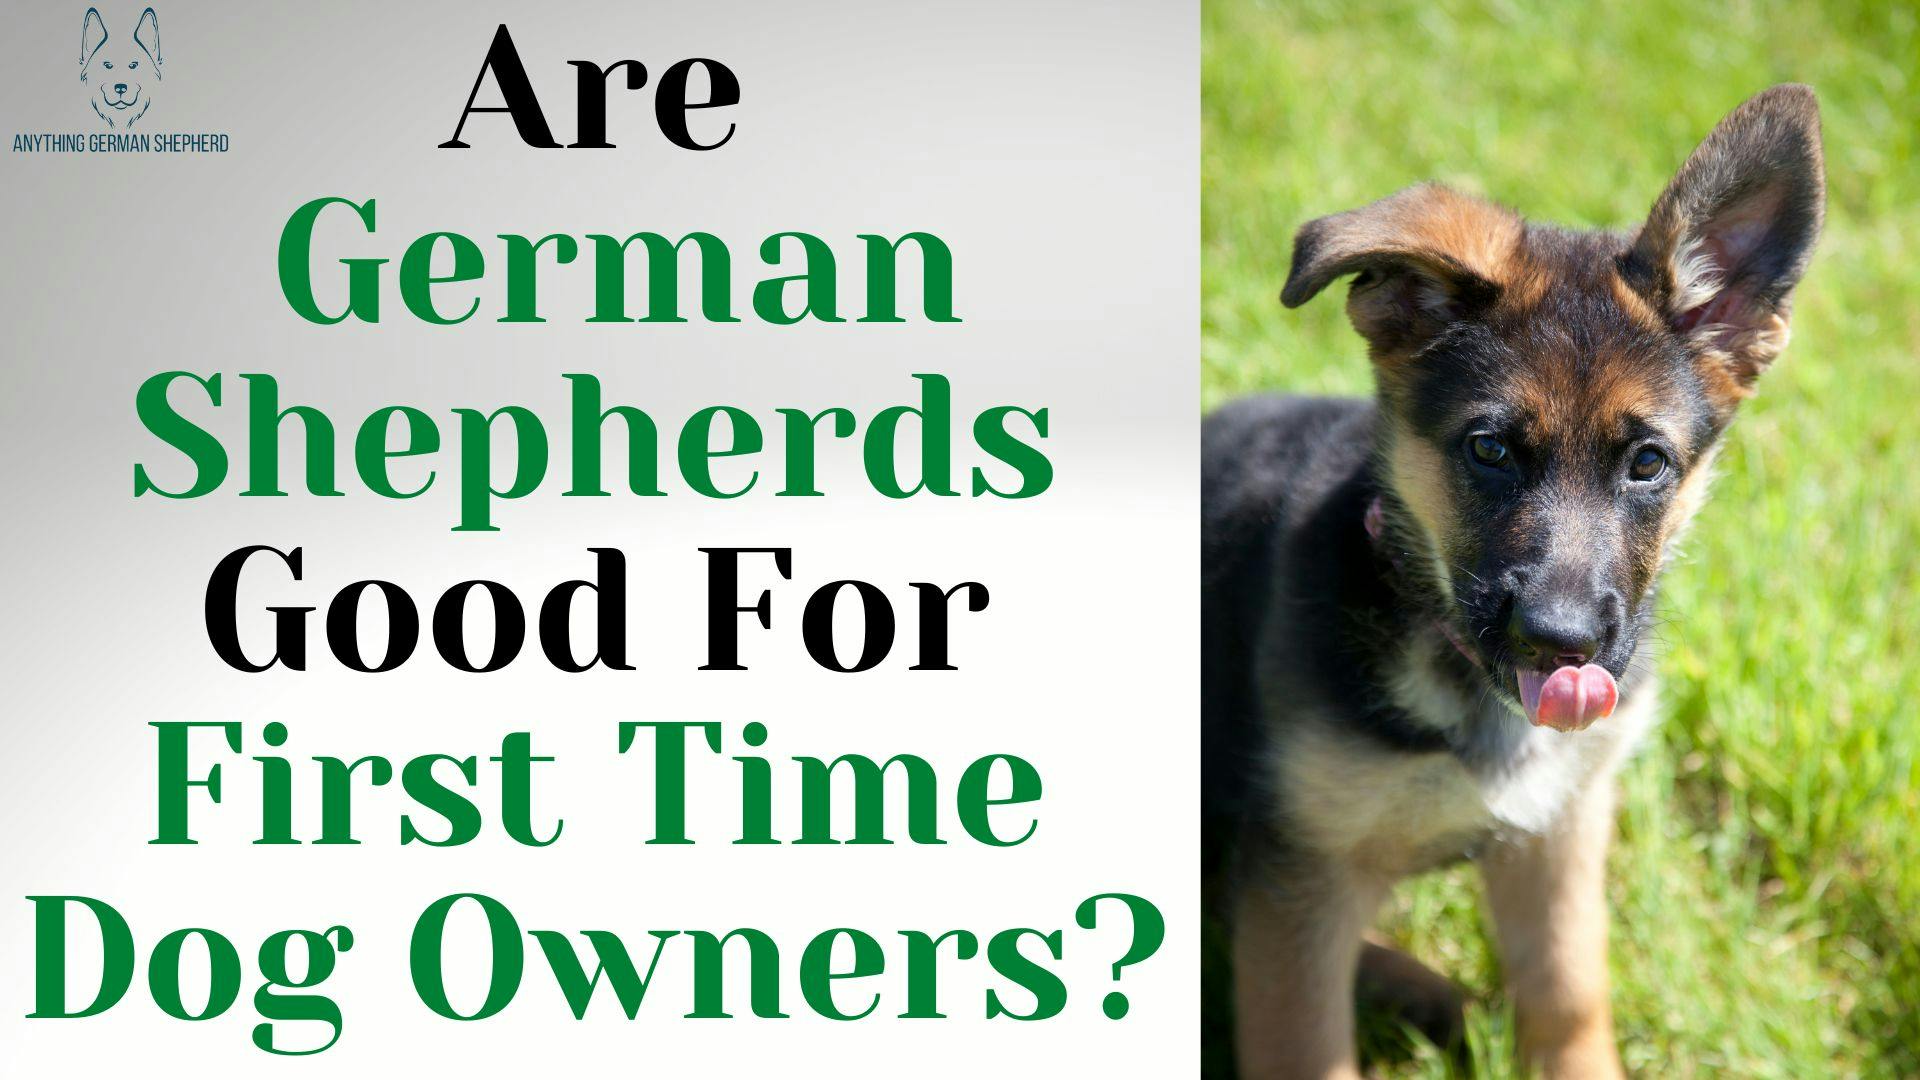 are-german-shepherds-good-for-first-time-owners-challenges-you-need-to-think-about